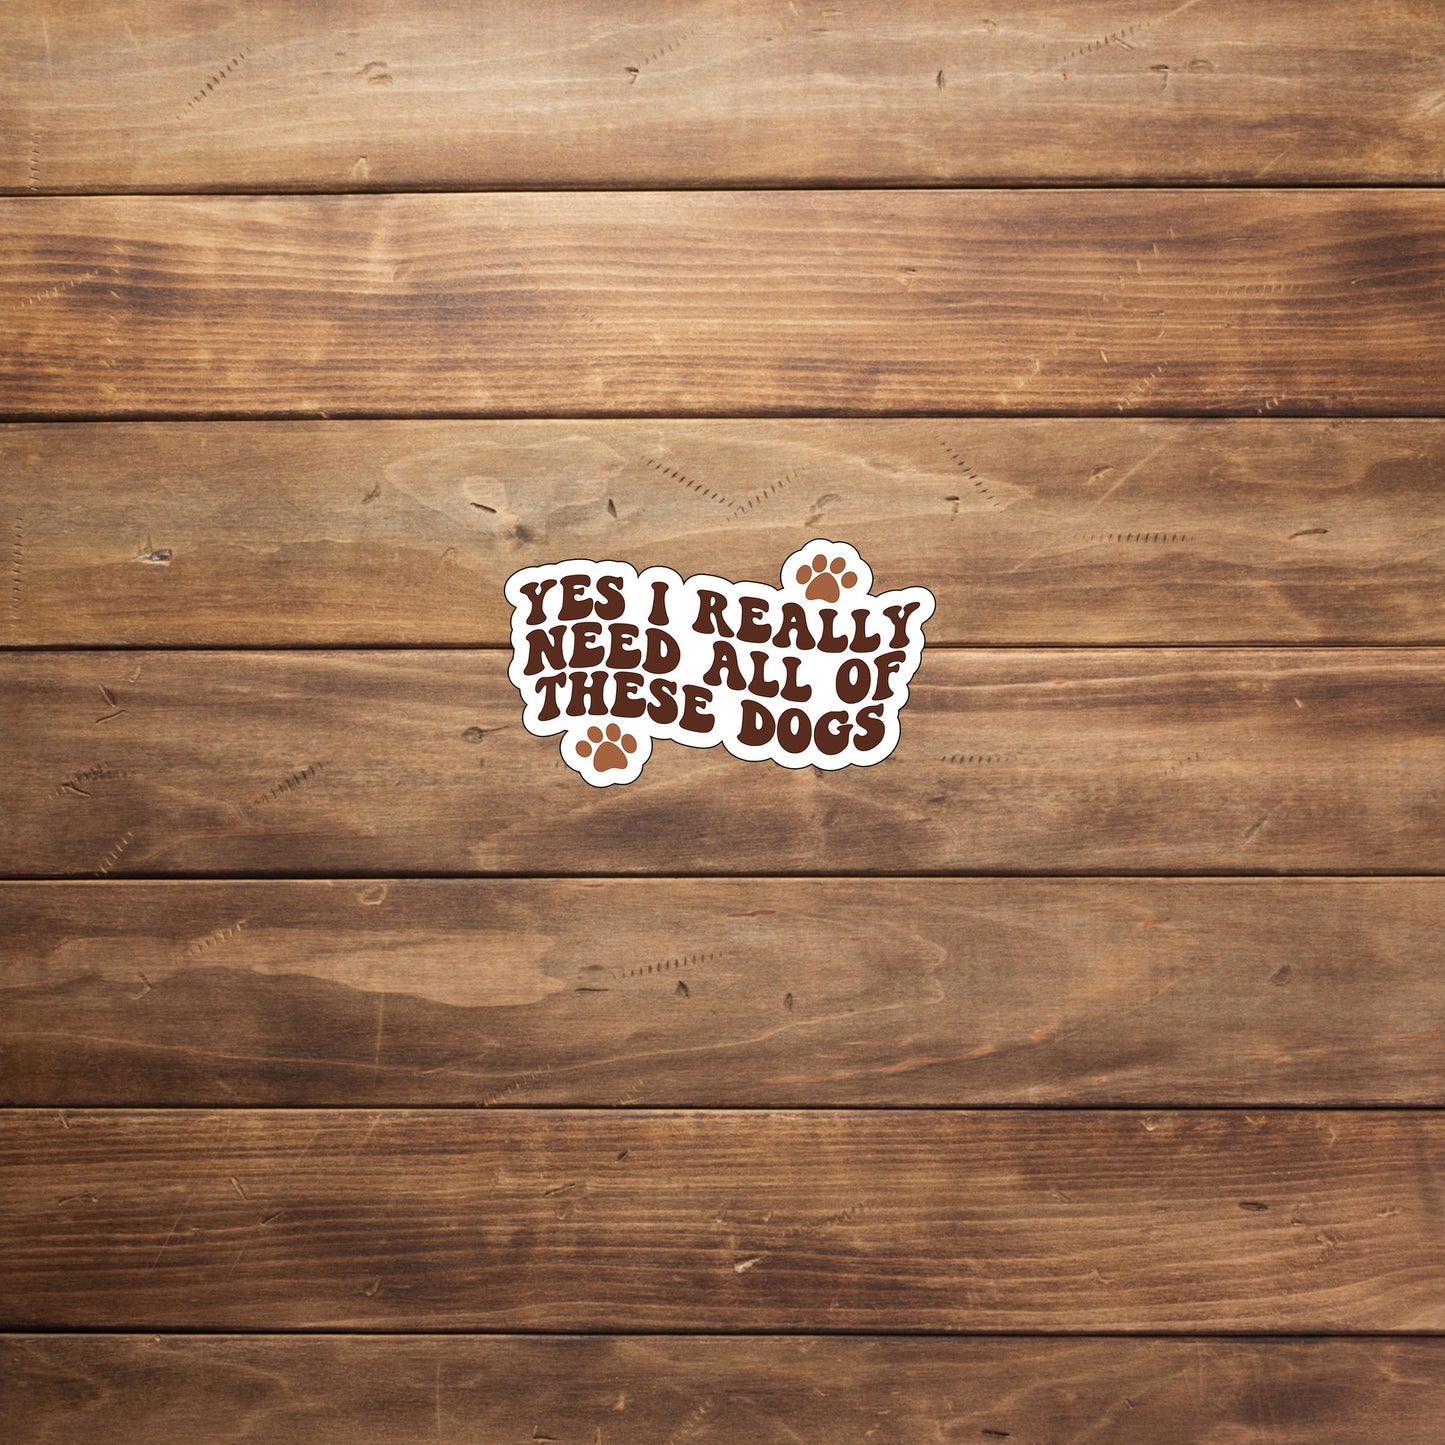 Yes I really do need all these cats  Sticker,  Vinyl sticker, laptop sticker, Tablet sticker